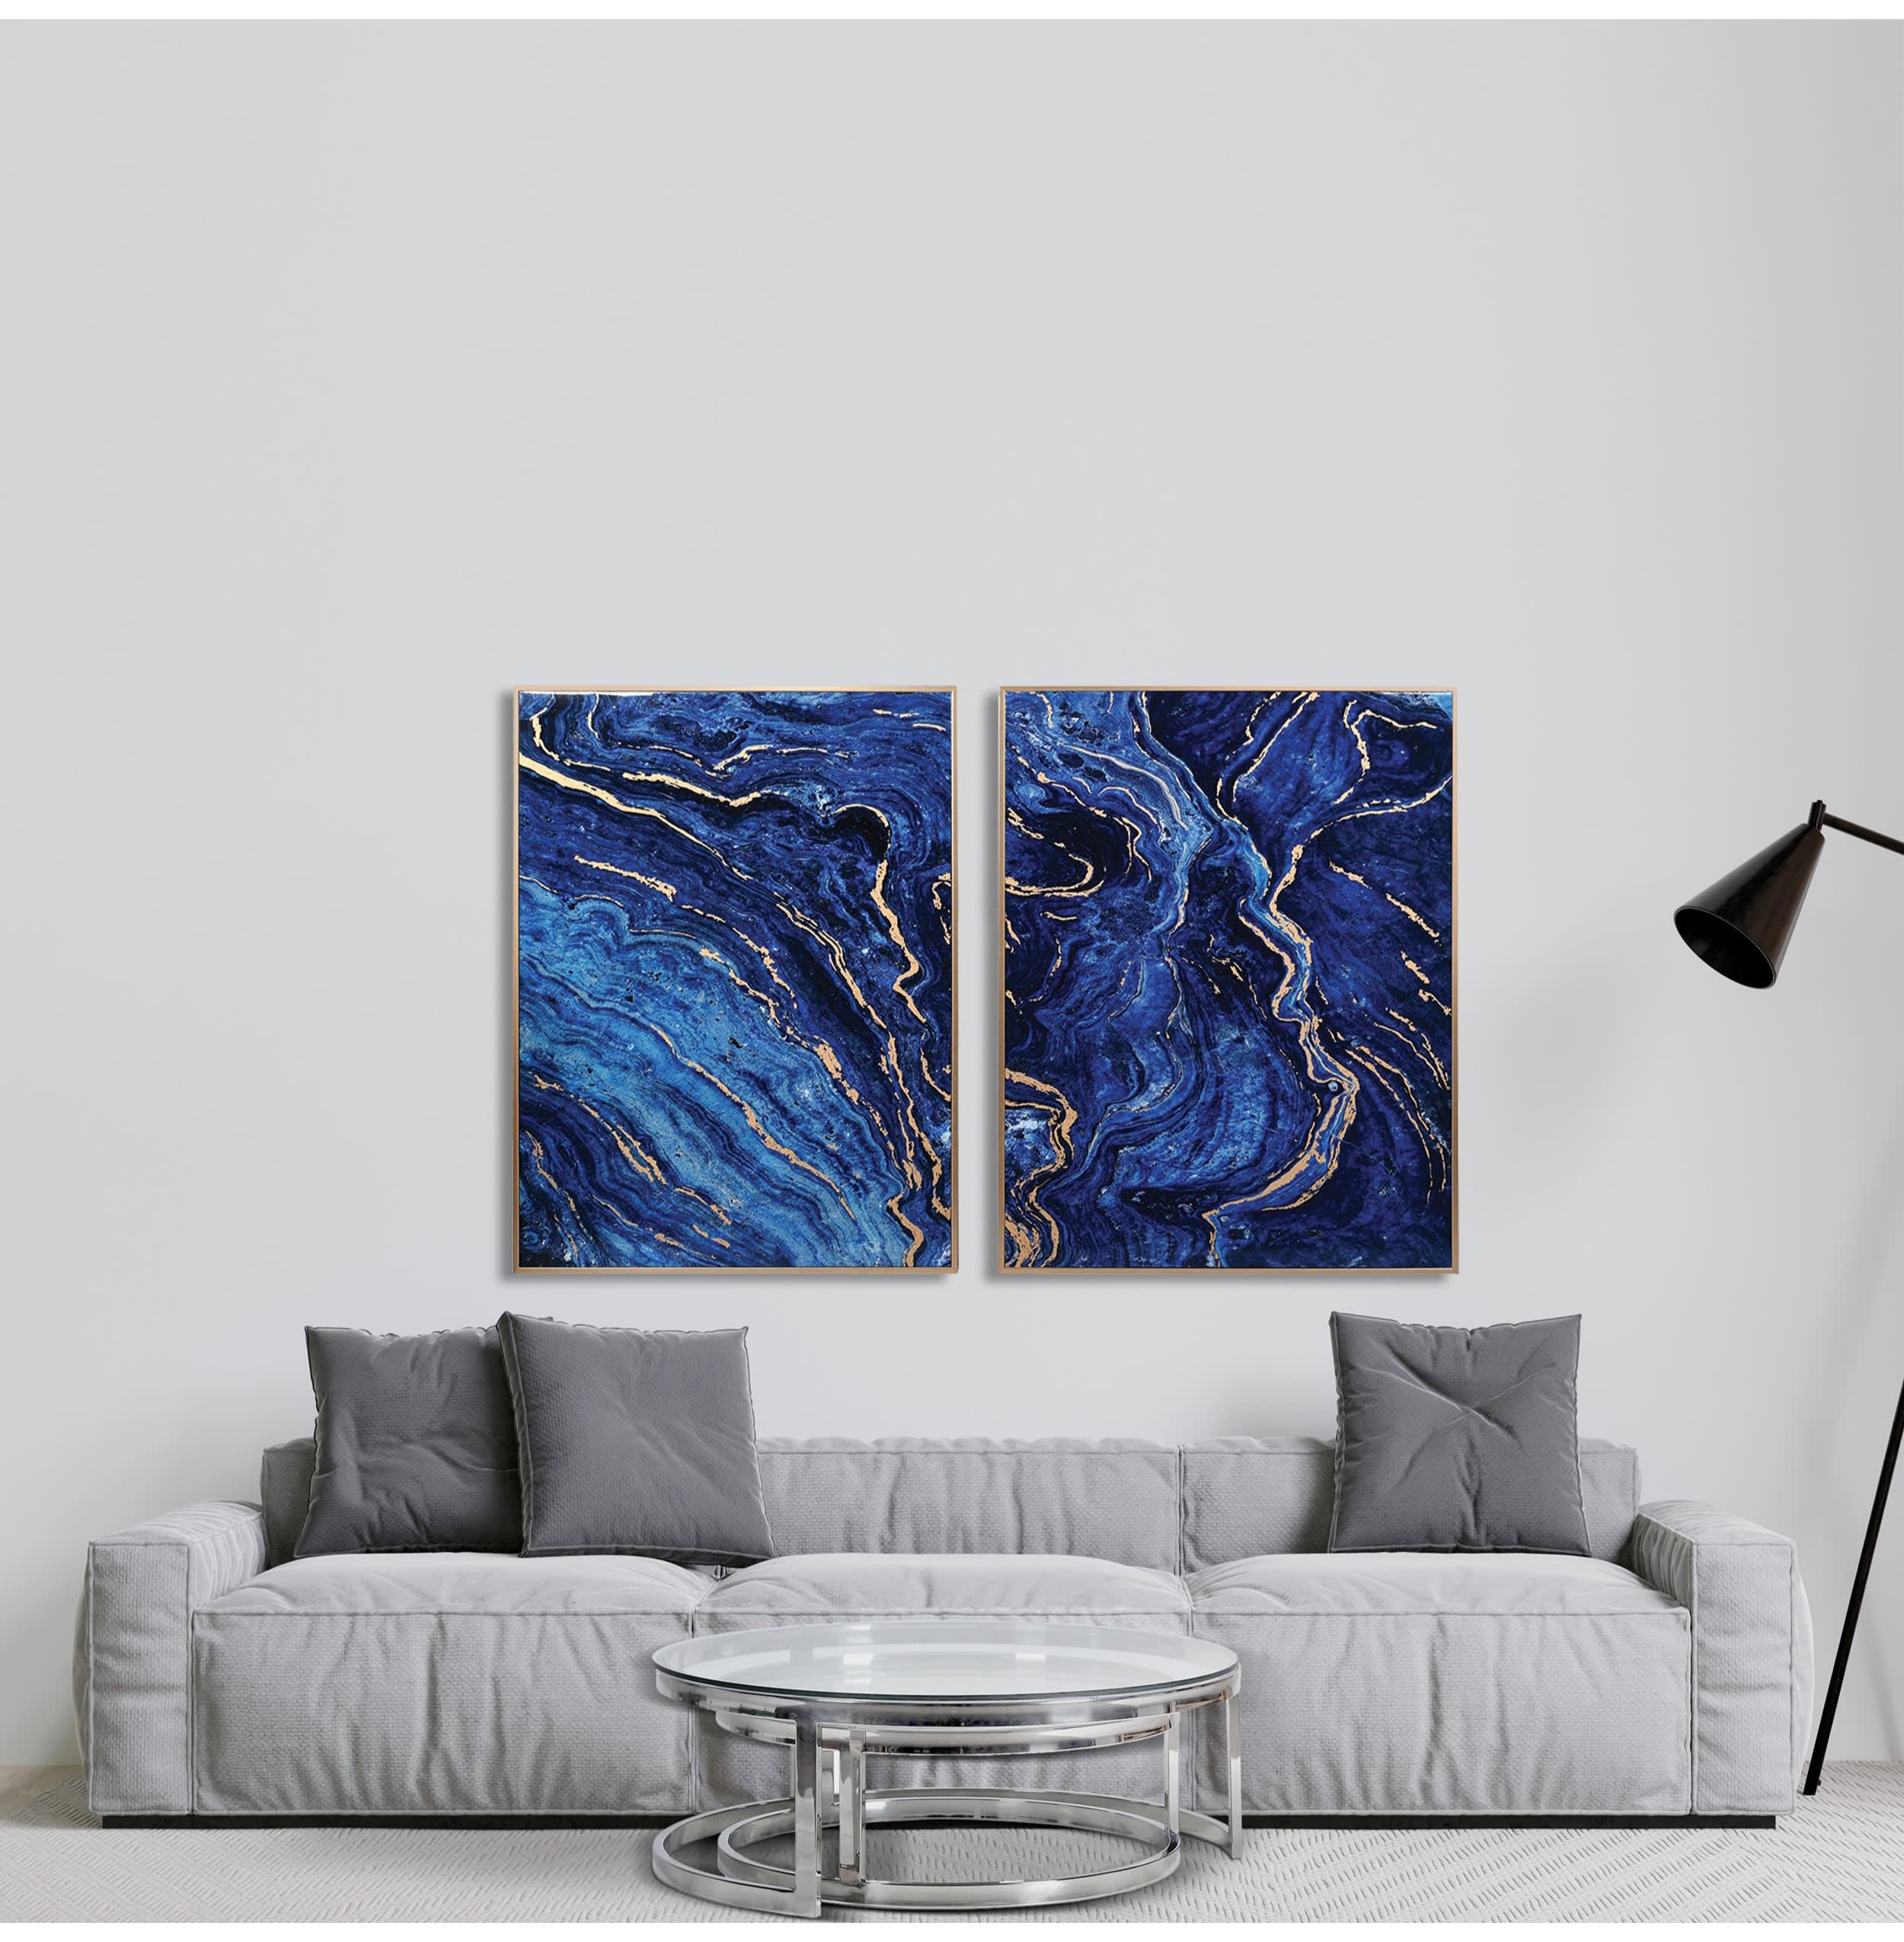 Set of 2 Blue Marble Effect Wall Panels